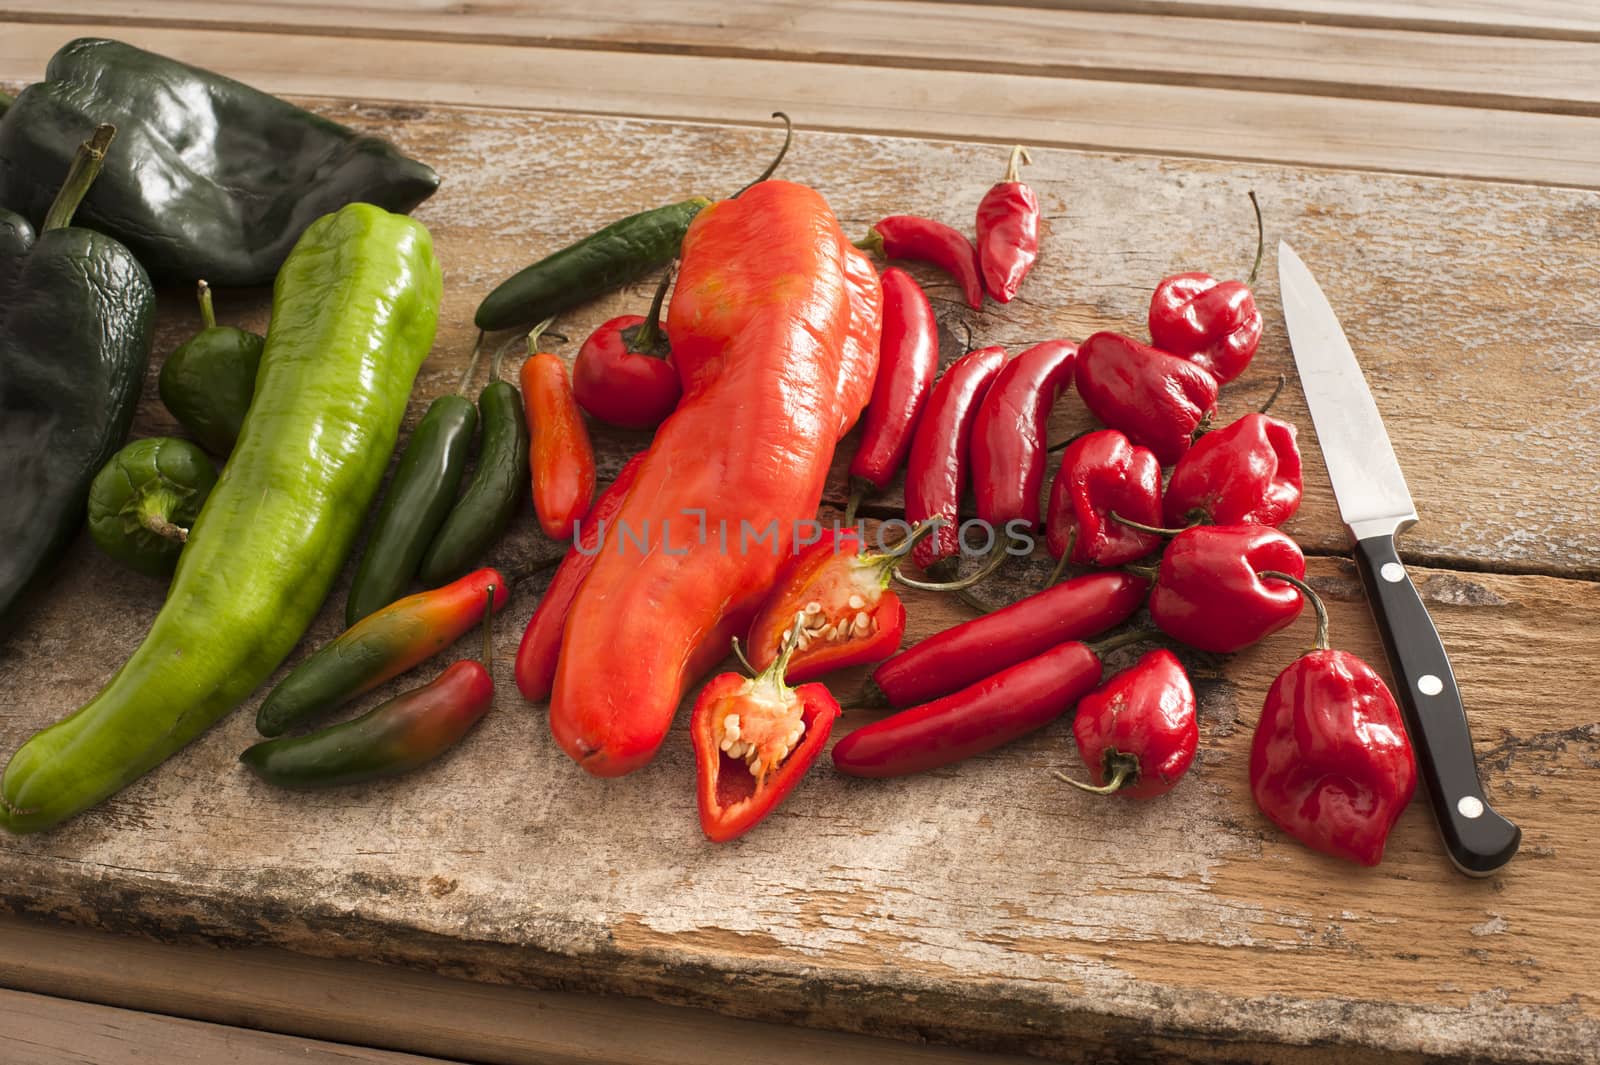 Assortment of colorful fresh peppers by stockarch